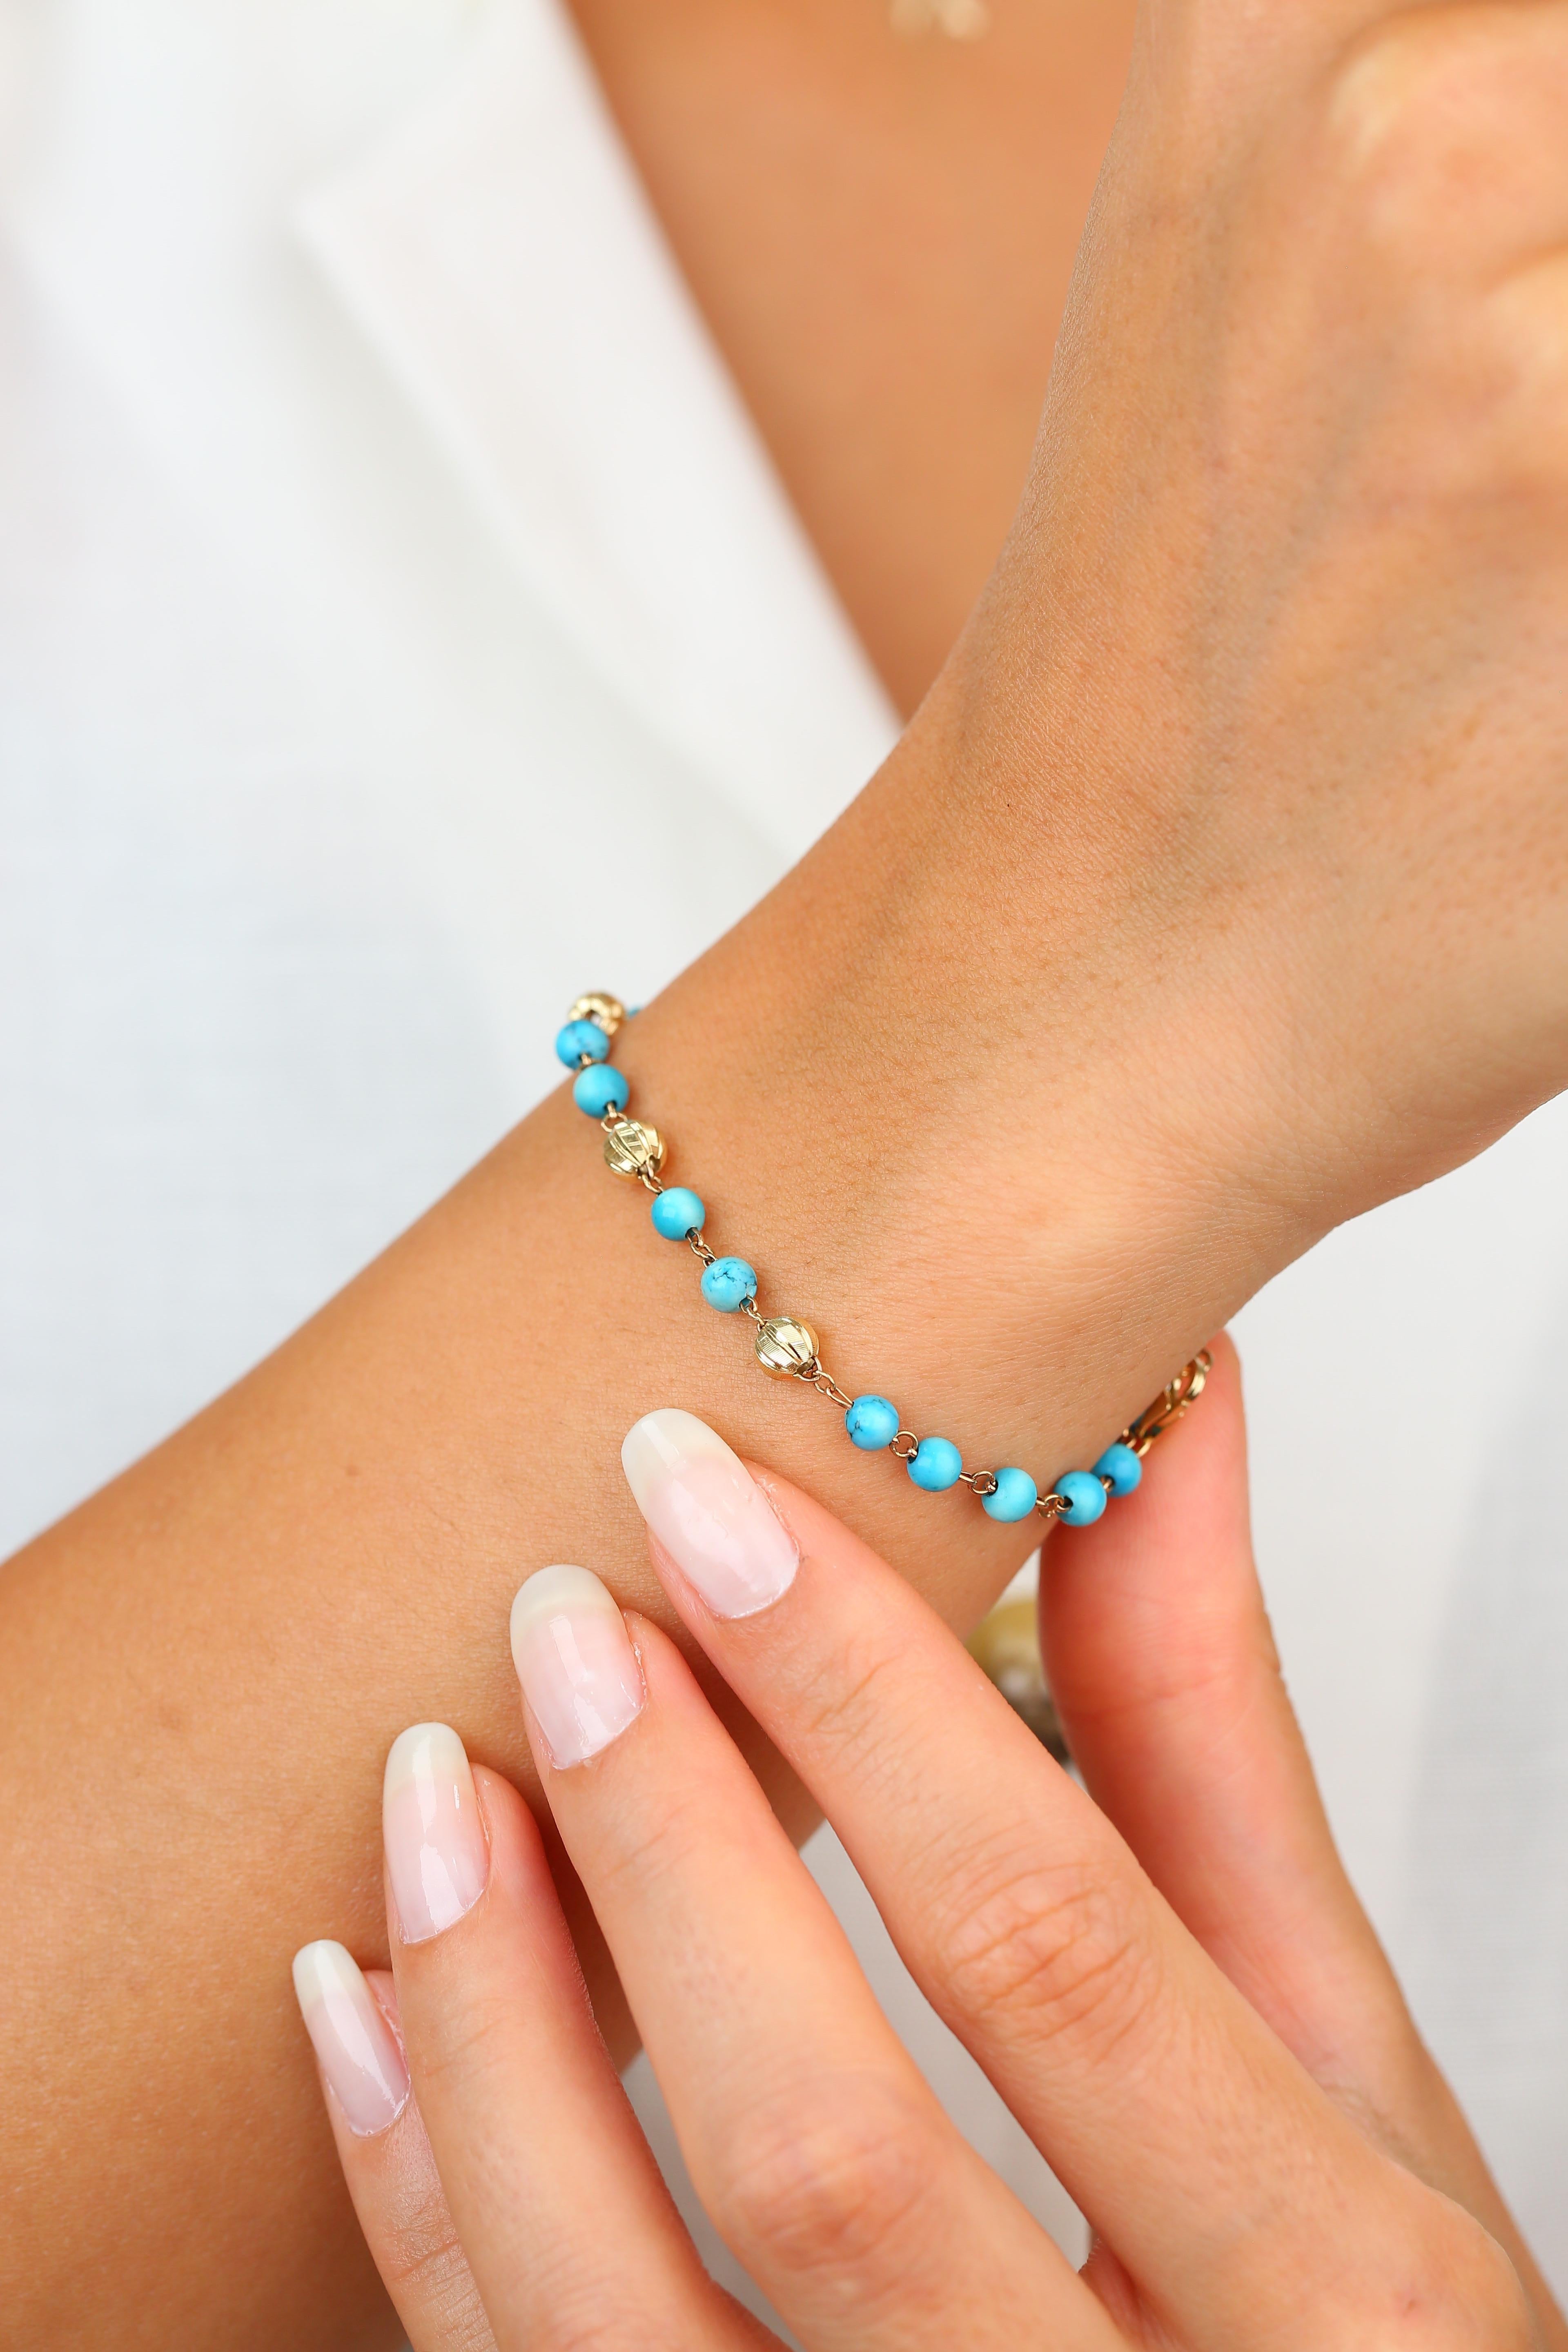 14K Gold Bracelet with Turquoise, 14k Gold Turquoise Bracelet, Turquoise Bracelet delicate bracelet created by hands from chain to the stone shapes. Good ideas of dainty bracelet or stackable bracelet gift for her.

I used turquoise stones for